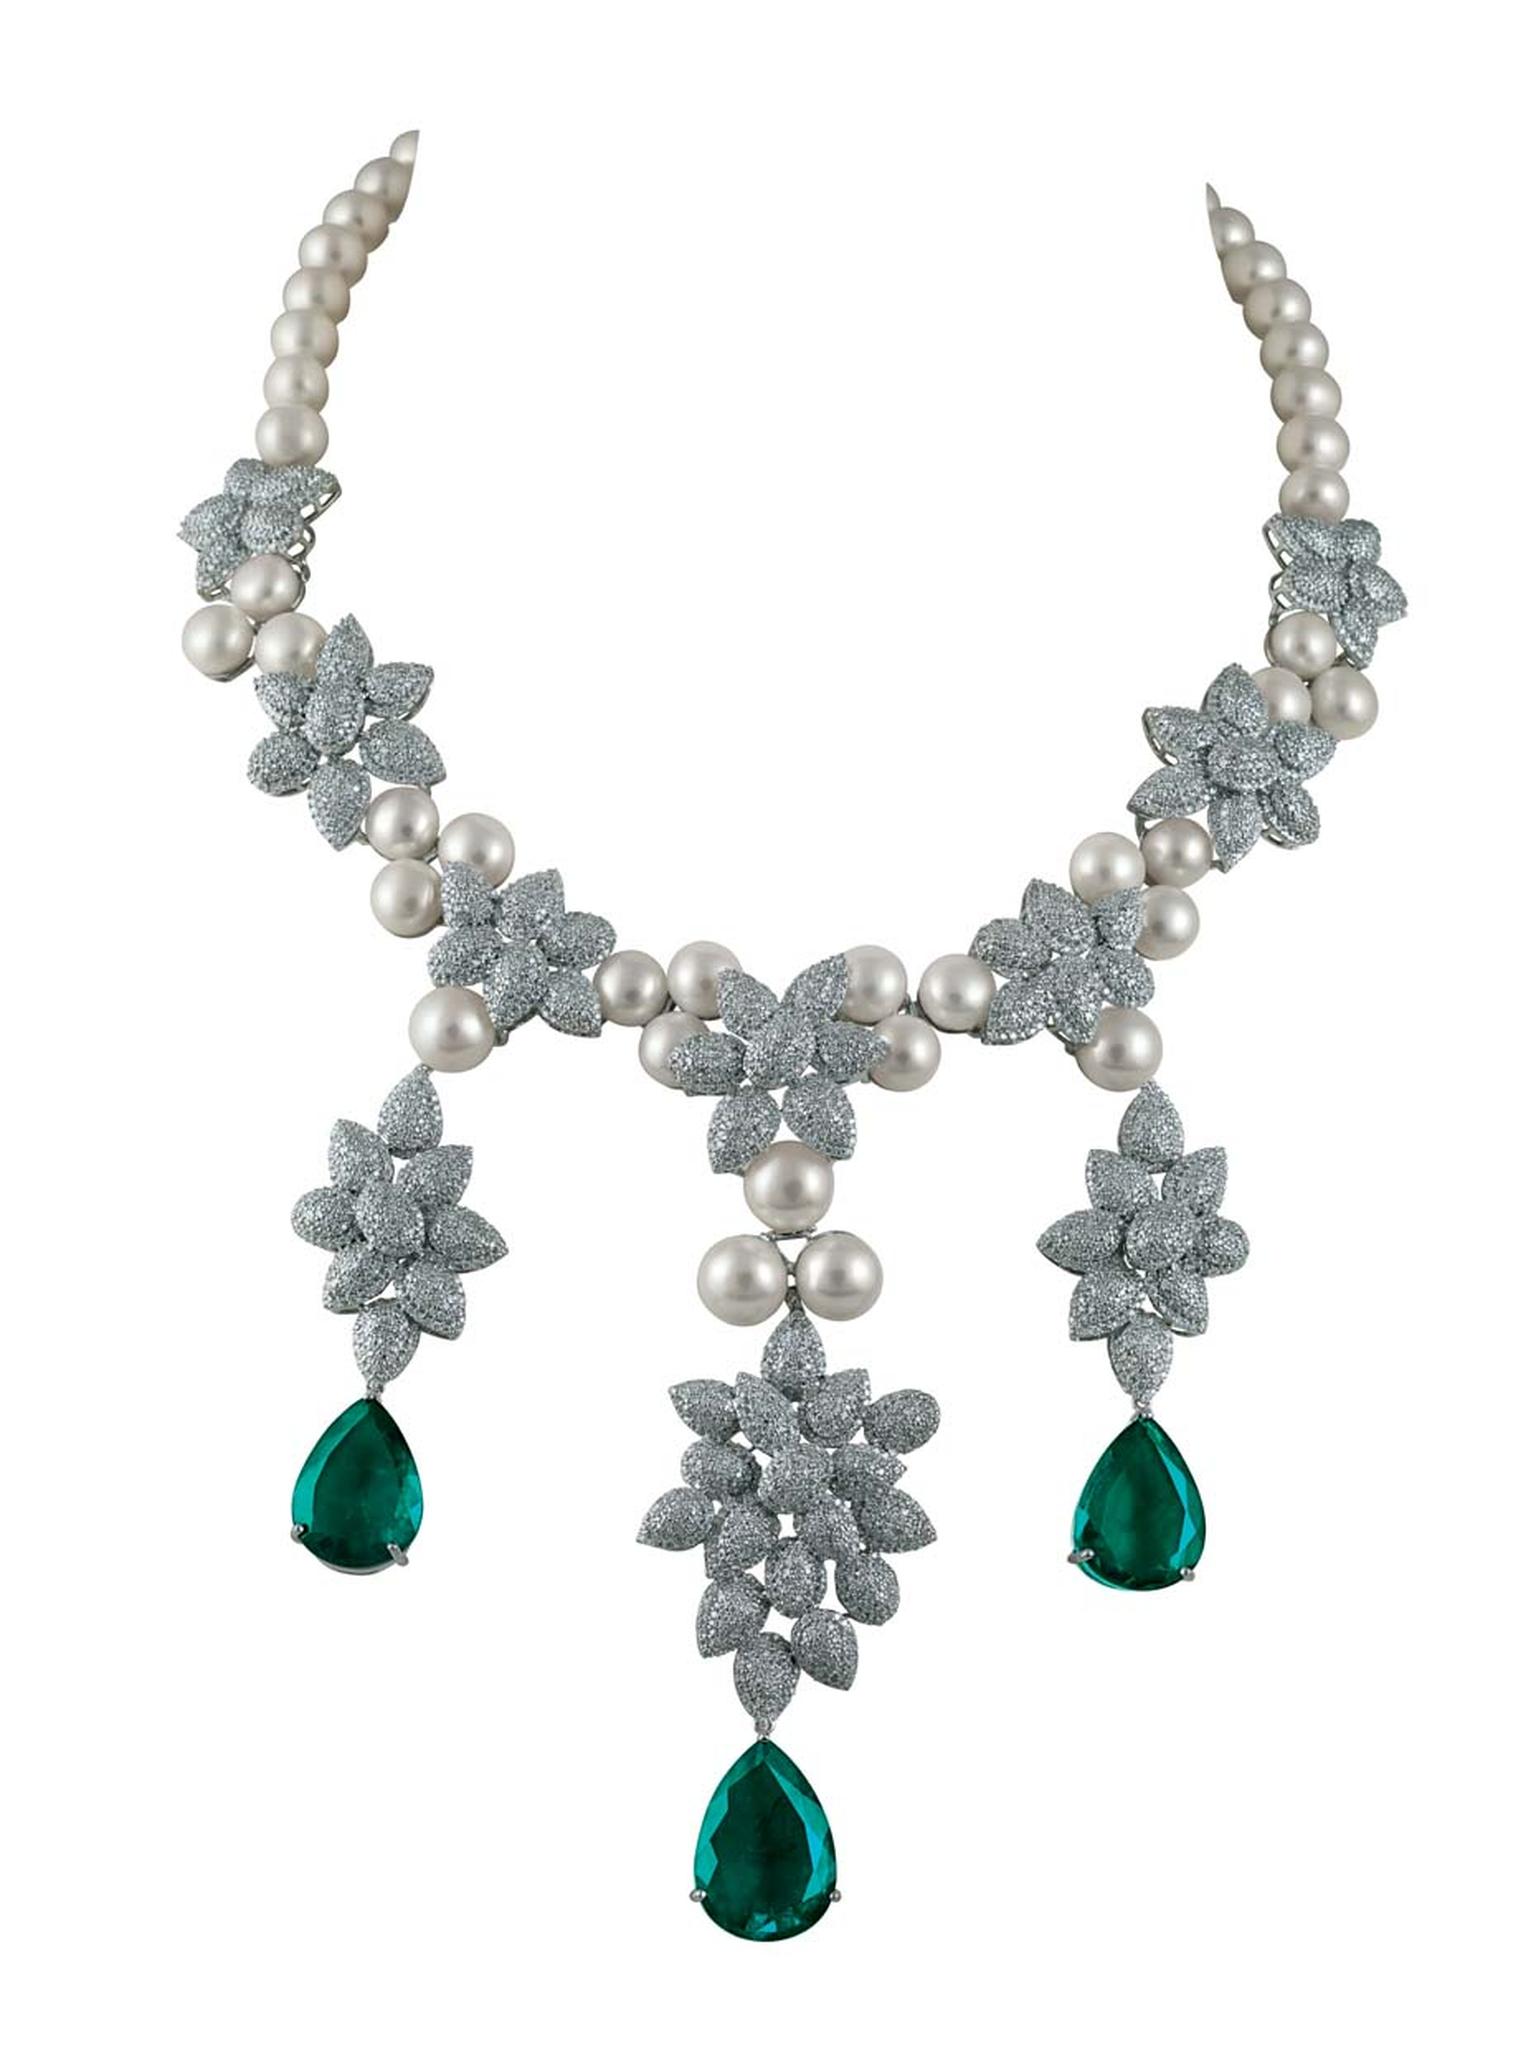 MINAWALA Festival of Emeralds collection necklace in white gold with diamonds, emeralds and pearls